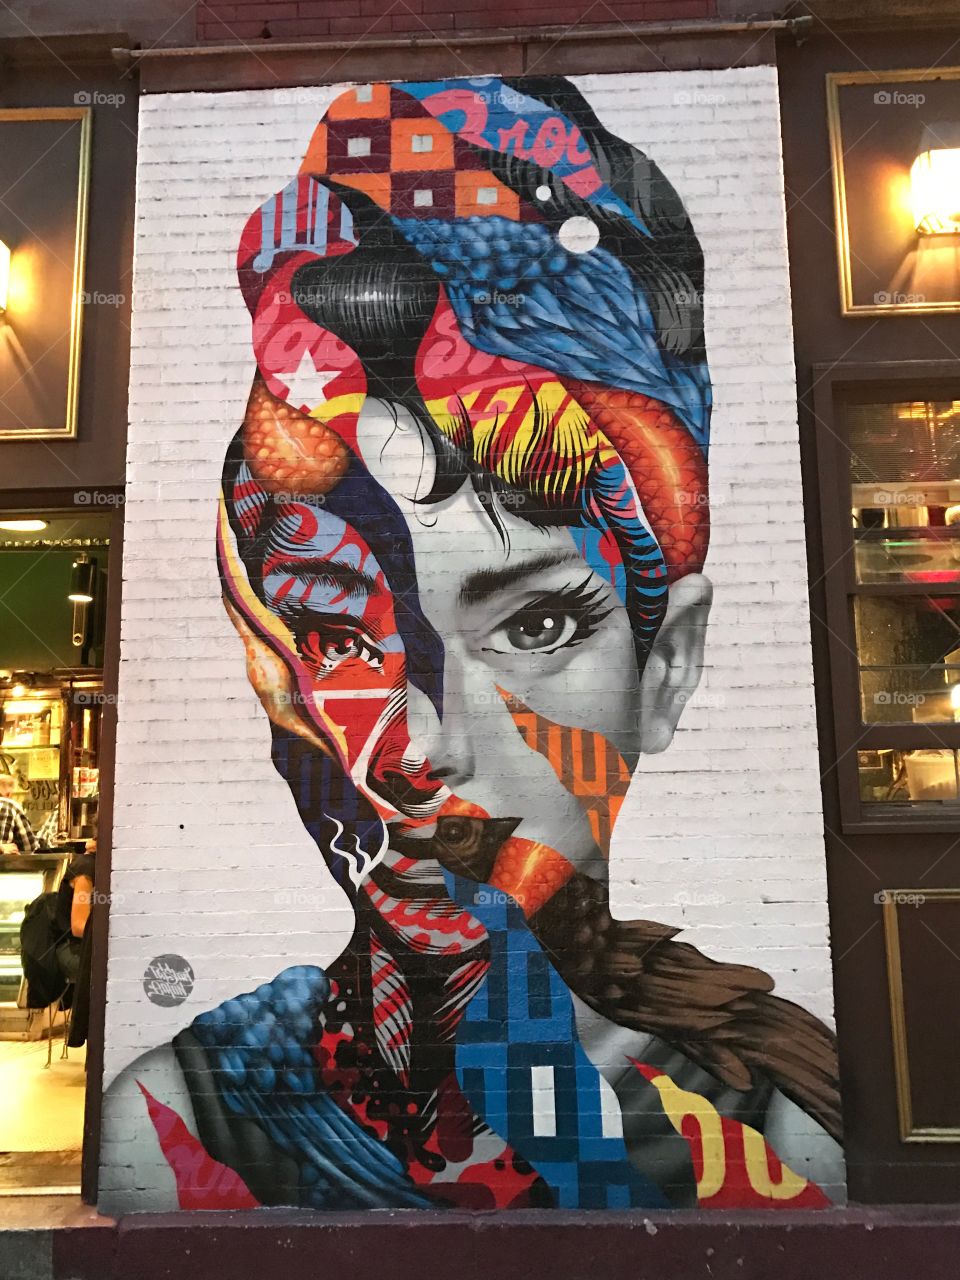 Mural in Little Italy, NYC